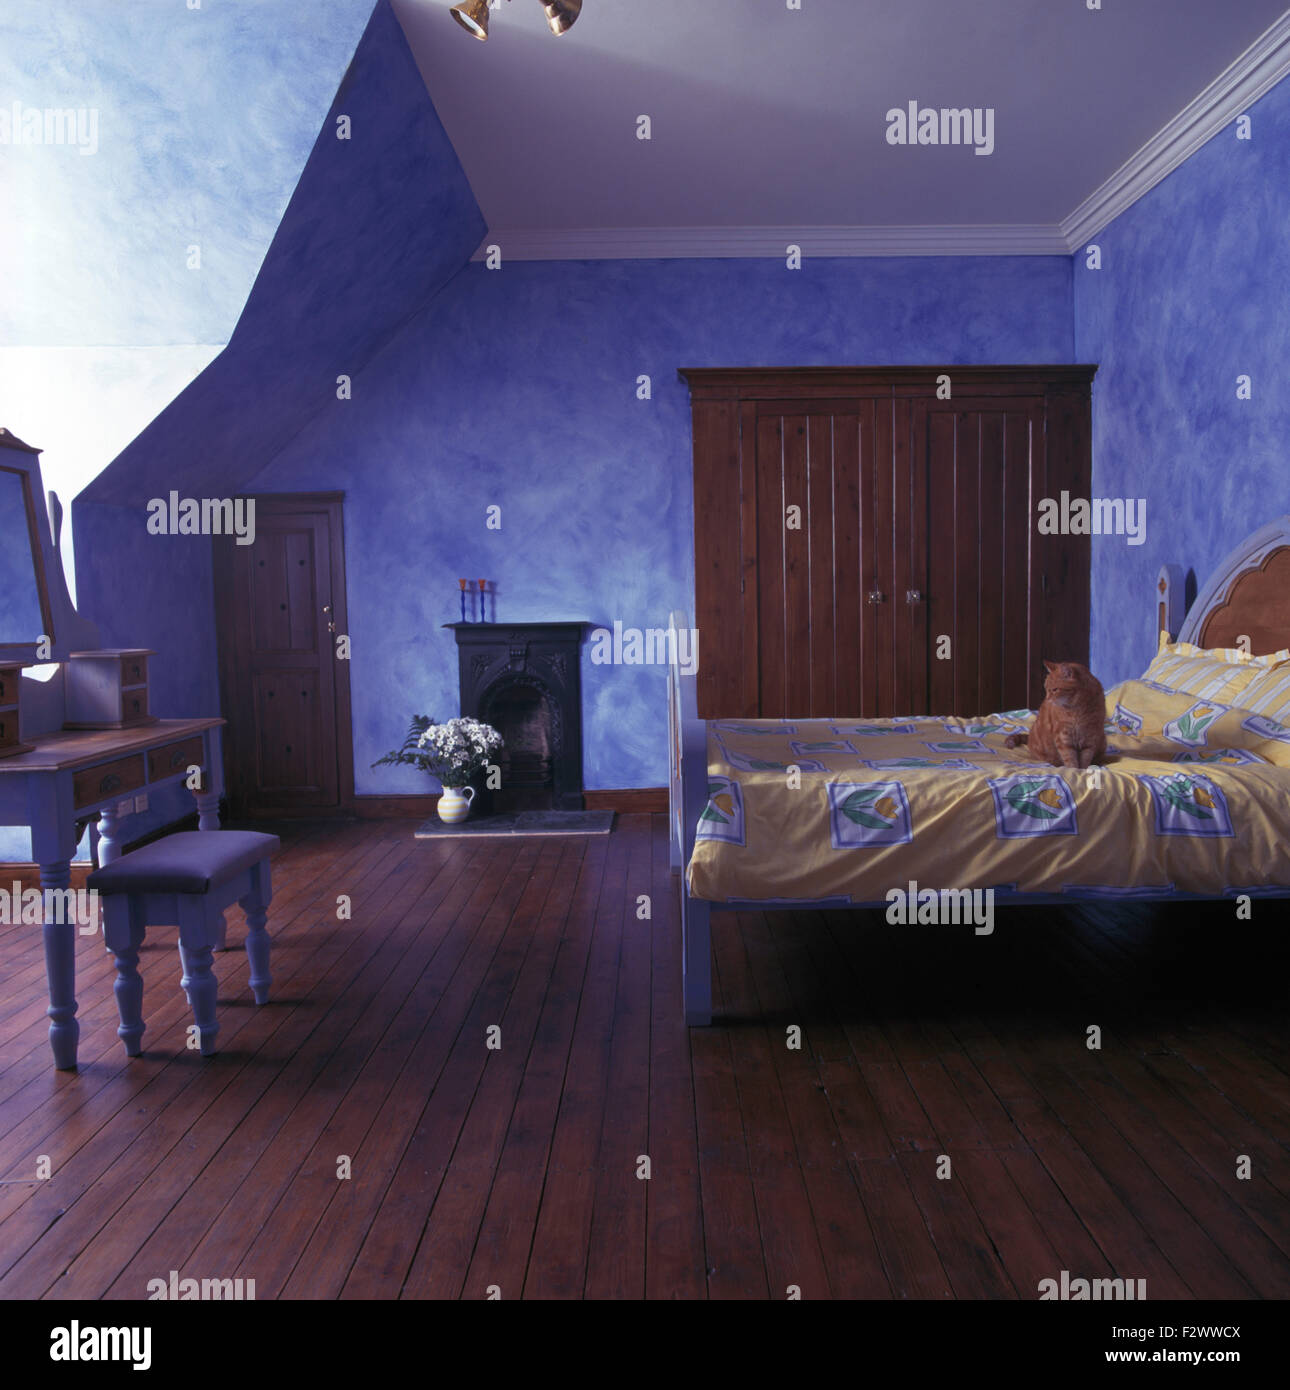 Wooden flooring in large blue country bedroom with walls painted in a sponging effect Stock Photo